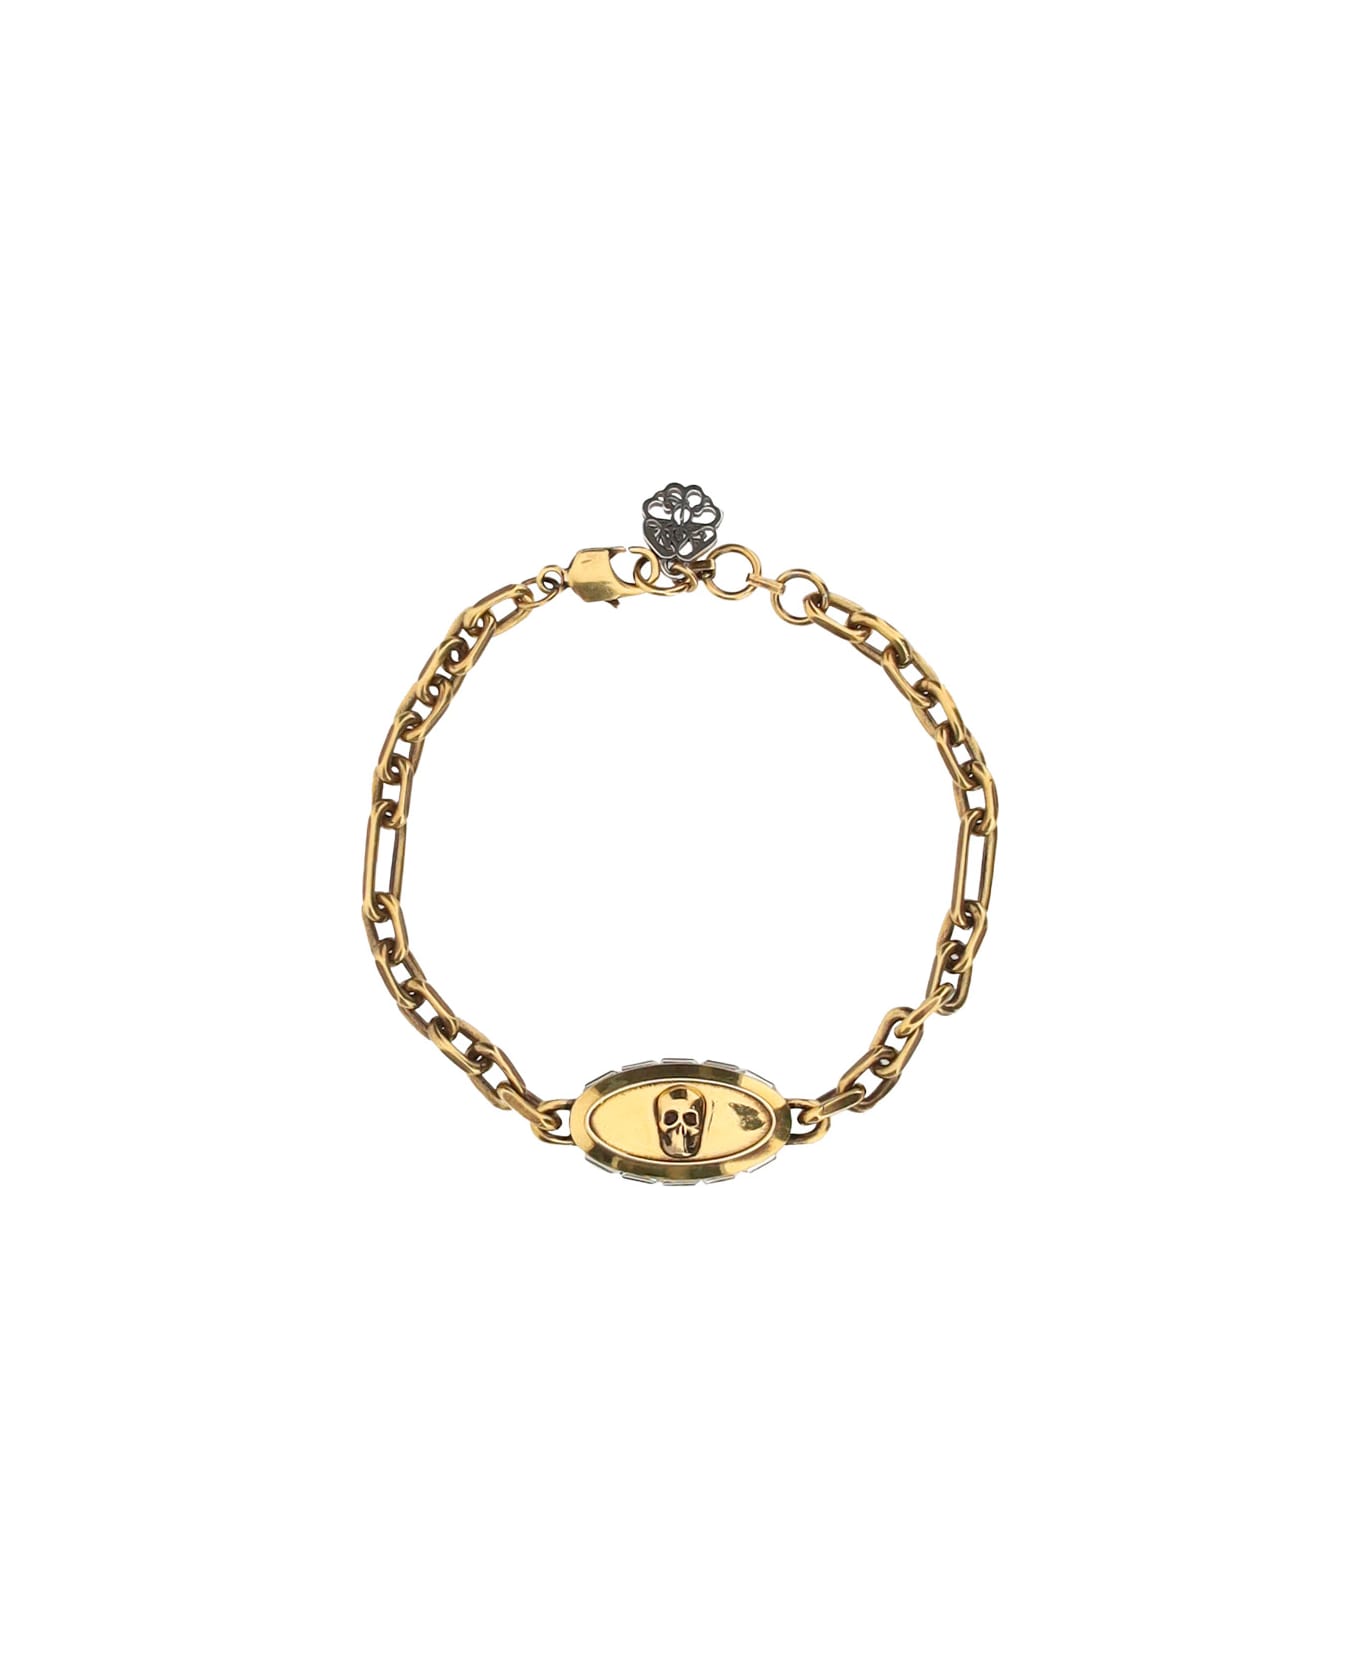 Alexander McQueen Chain Bracelet With Skull Detail And Logo Charm - 0446/0448/crystal